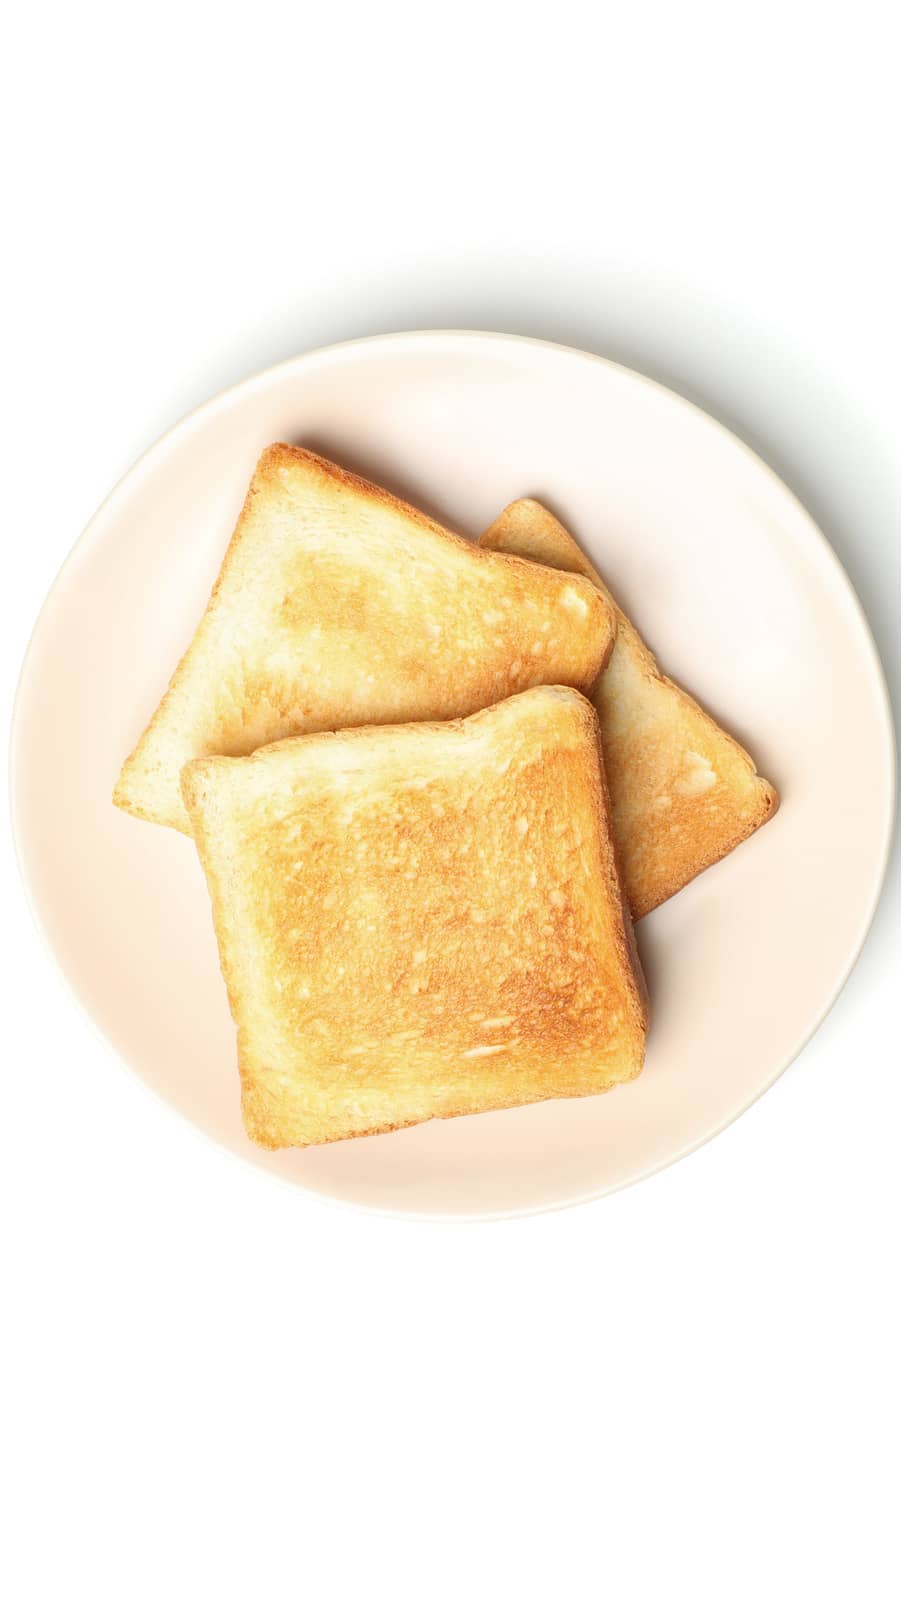 Toasts on a plate